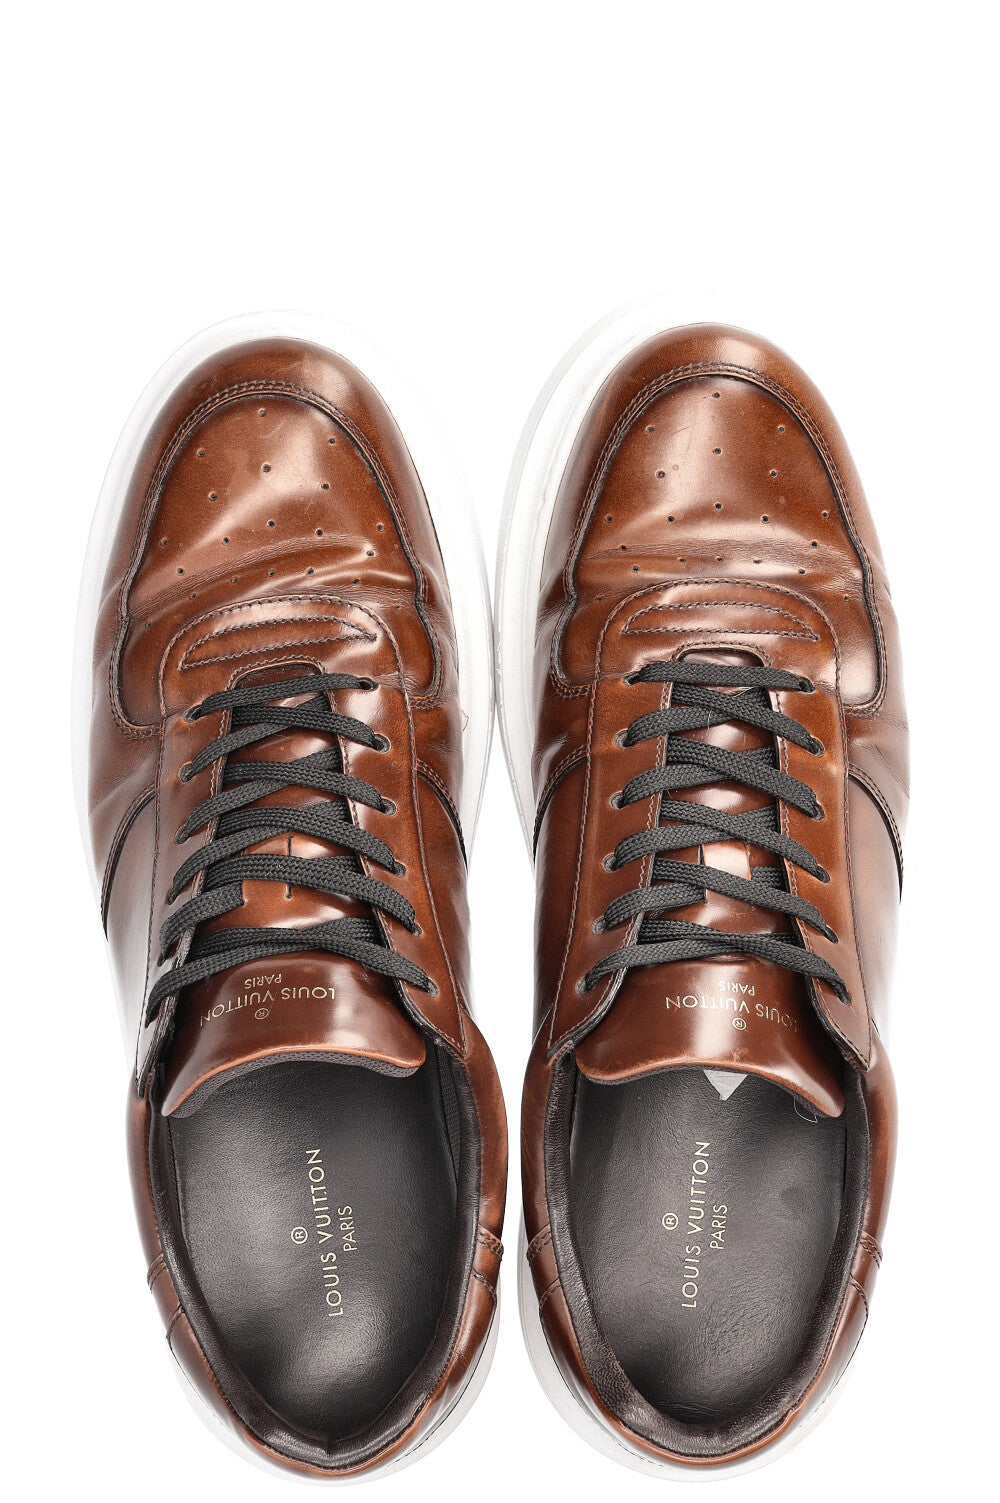 LOUIS VUITTON Beverly Hills Sneakers Brown